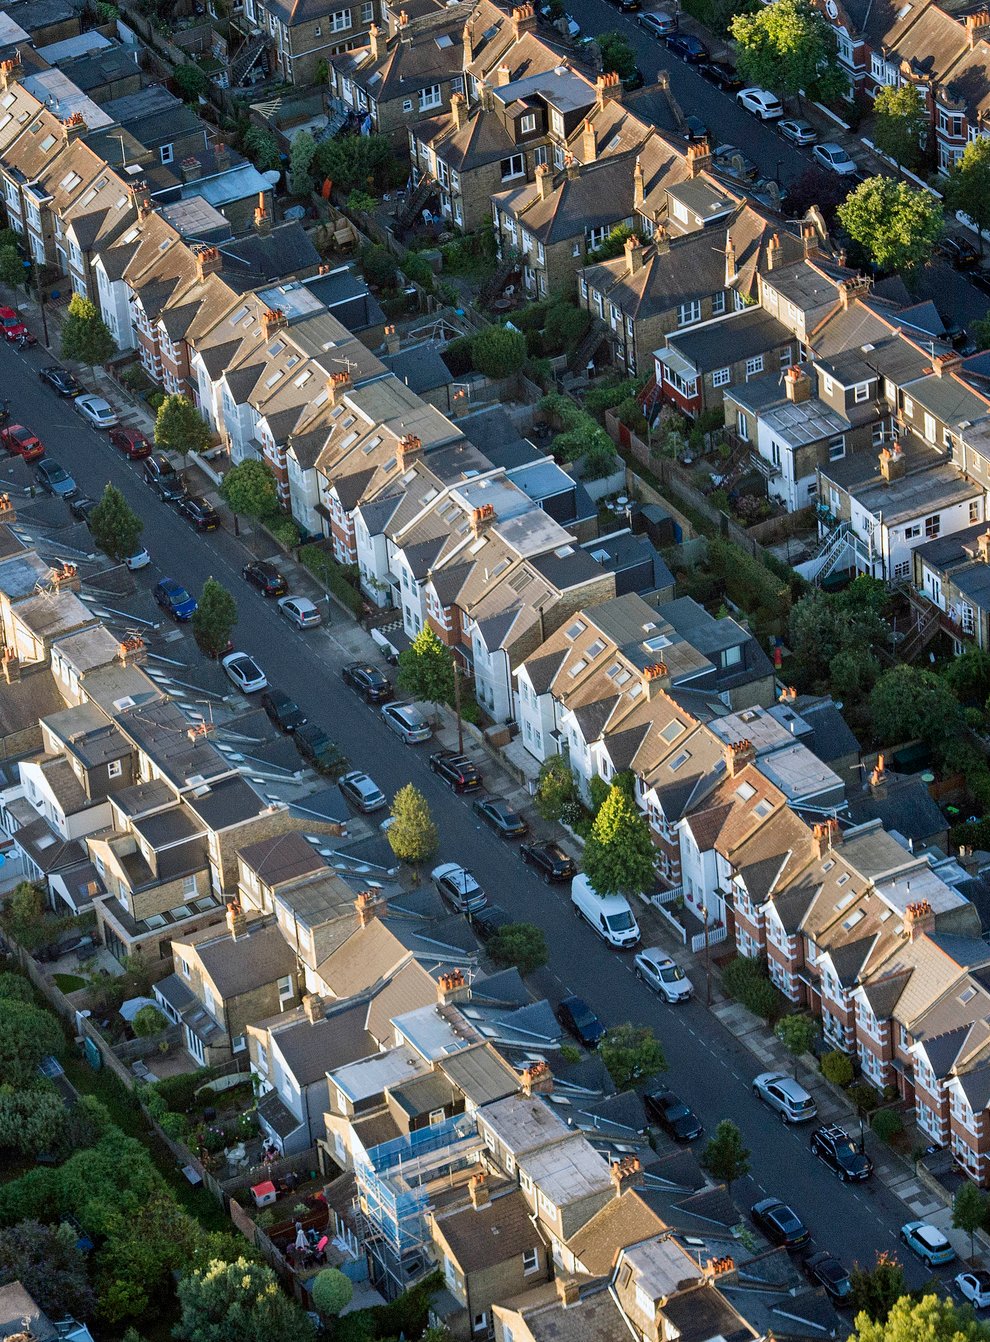 The average UK house price jumped by £24,000 in the year to March, according to official figures (Victoria Jones/PA)